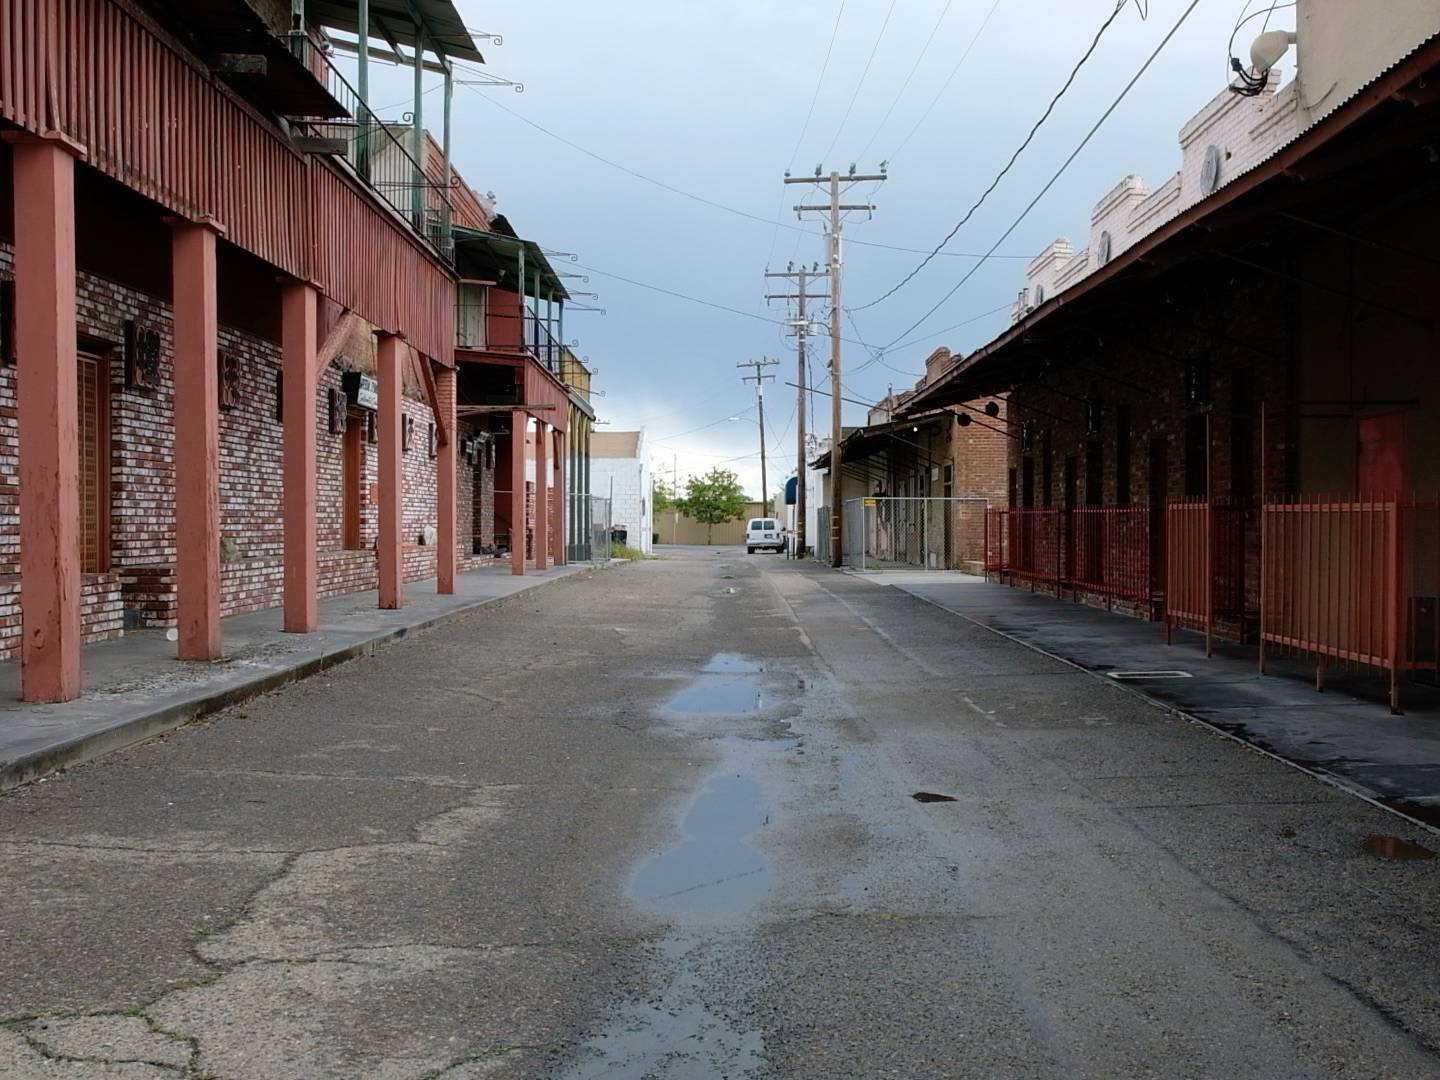 A photograph of a mostly empty alleyway between two rows of reddish-brown buildings